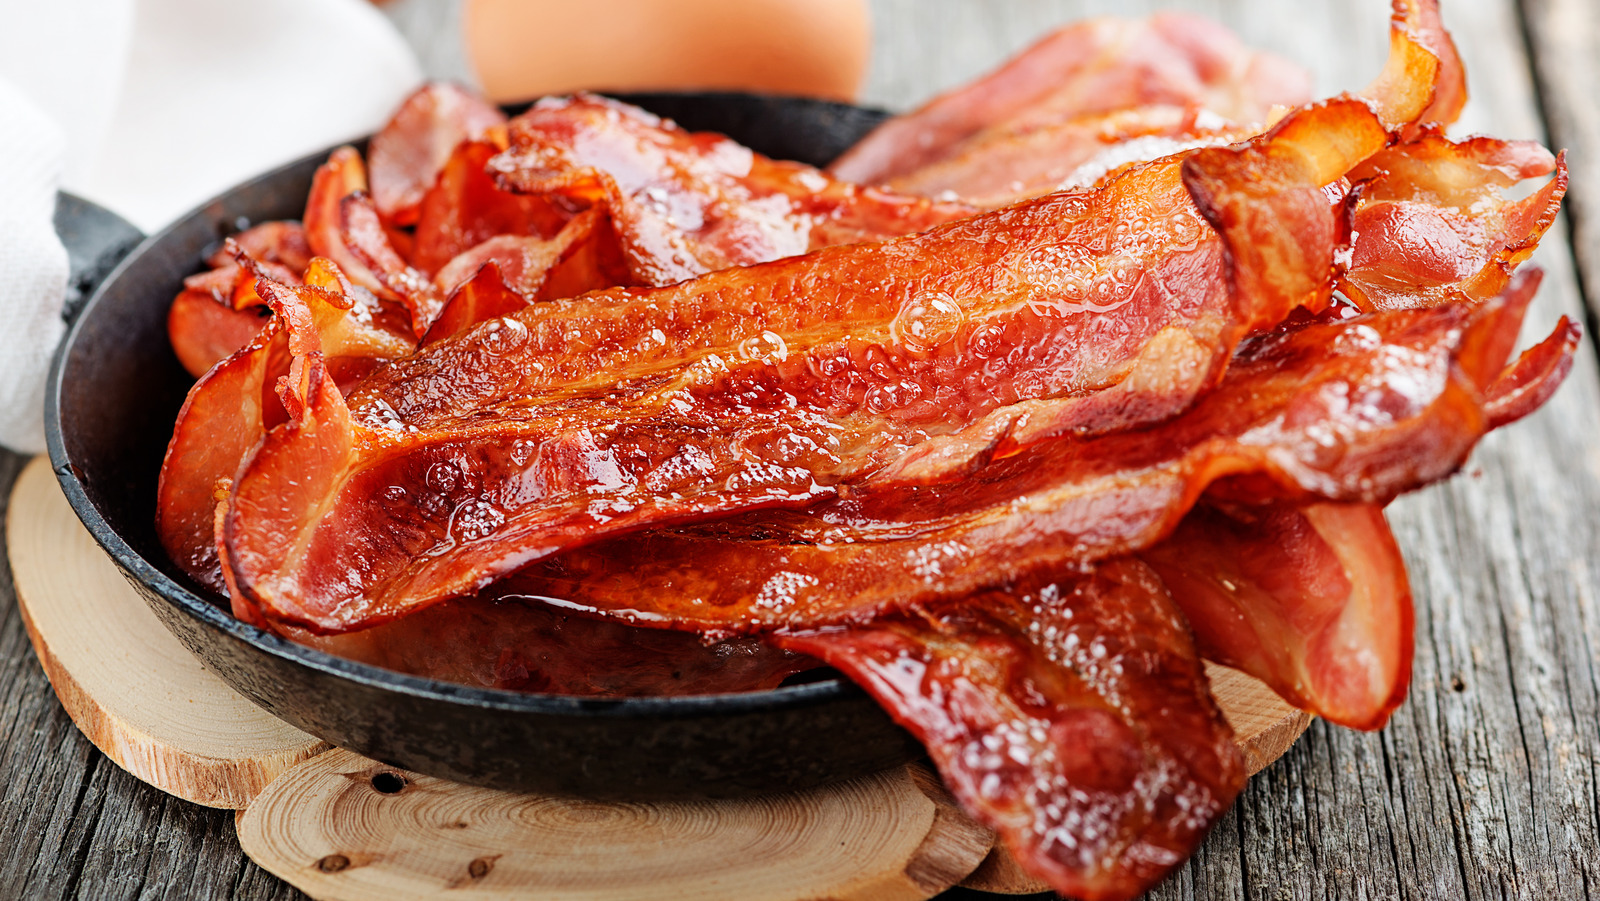 The Real Reason You're Paying A SkyHigh Price For Bacon